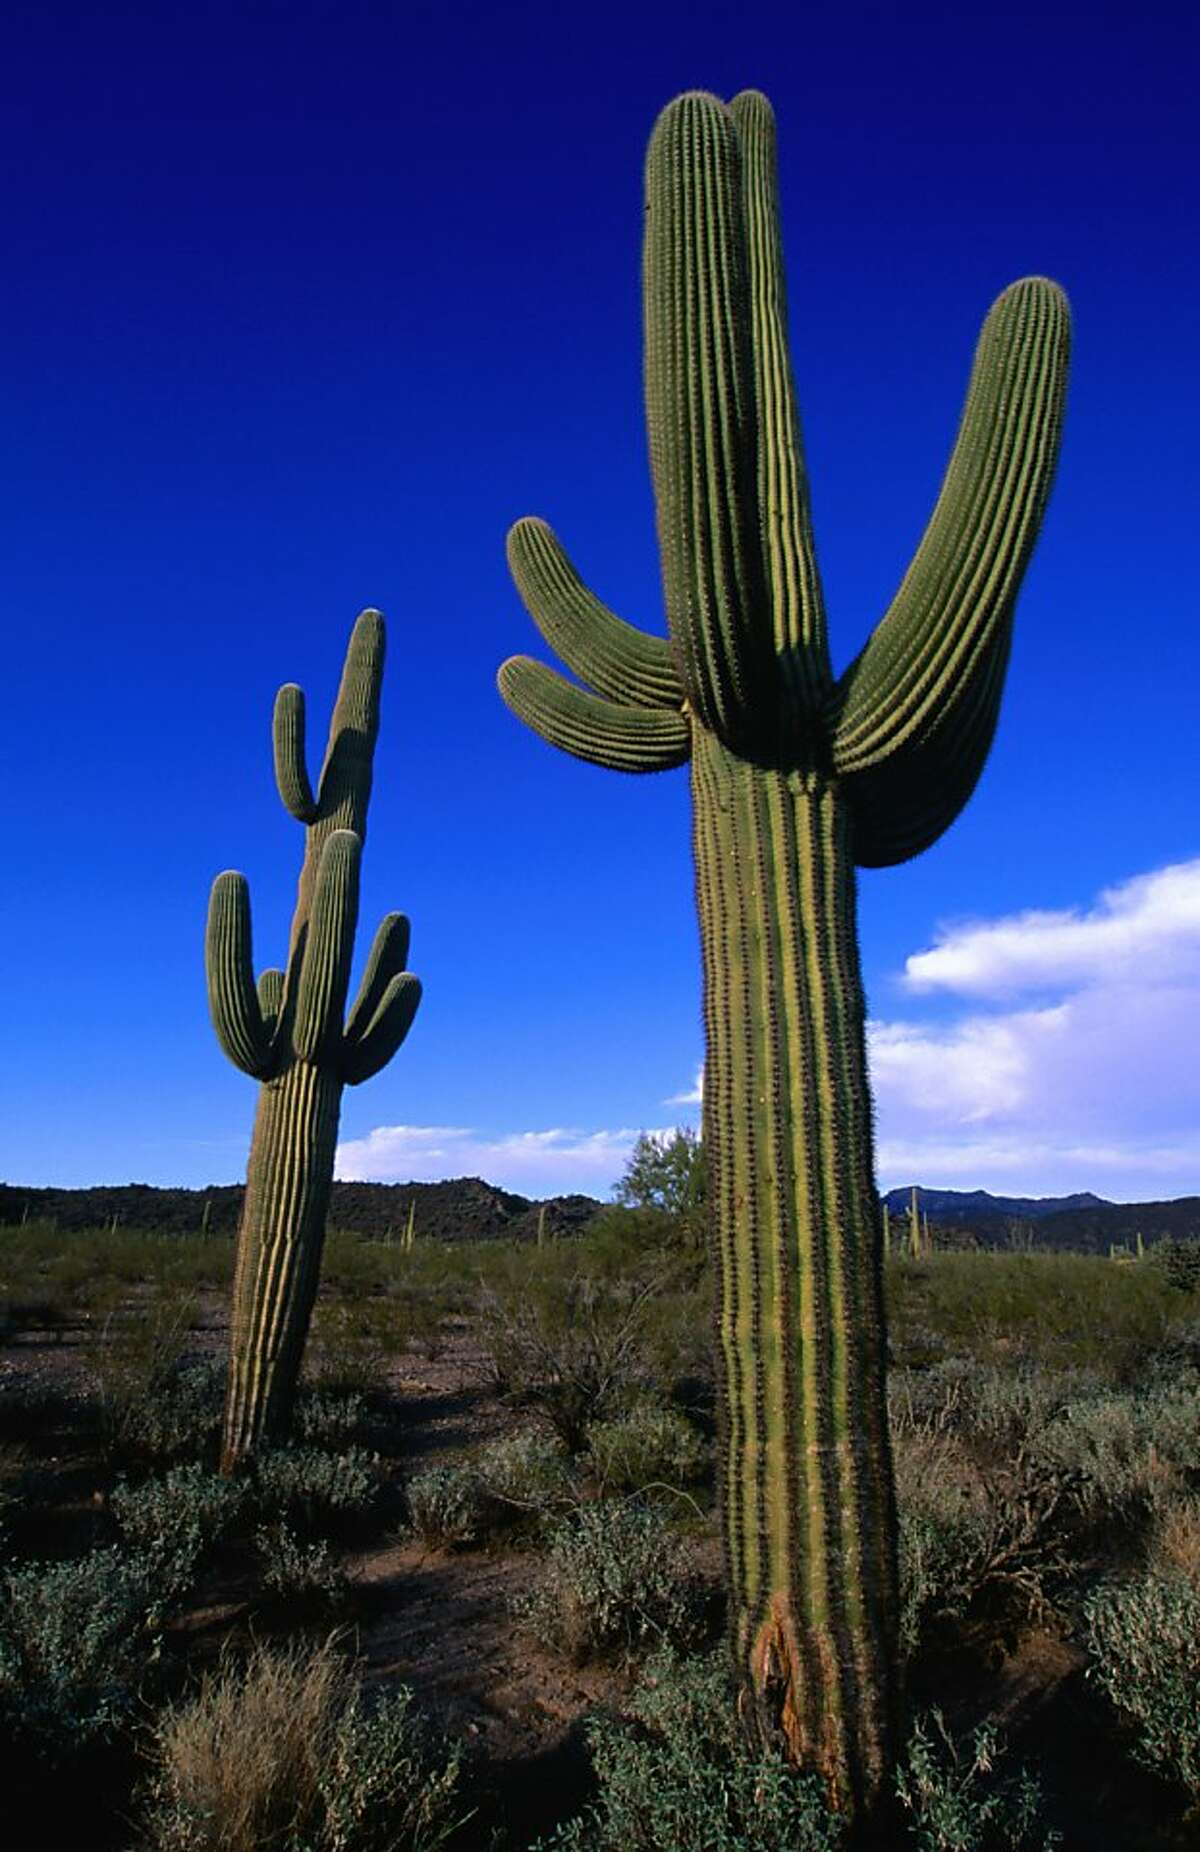 Tucson: A big symbolic gesture Tucson decided to make its point with a 21-foot saguaro cactus, delivered to Amazon CEO Jeff Bezos. The company declined the gift, choosing instead to donate it to a museum.